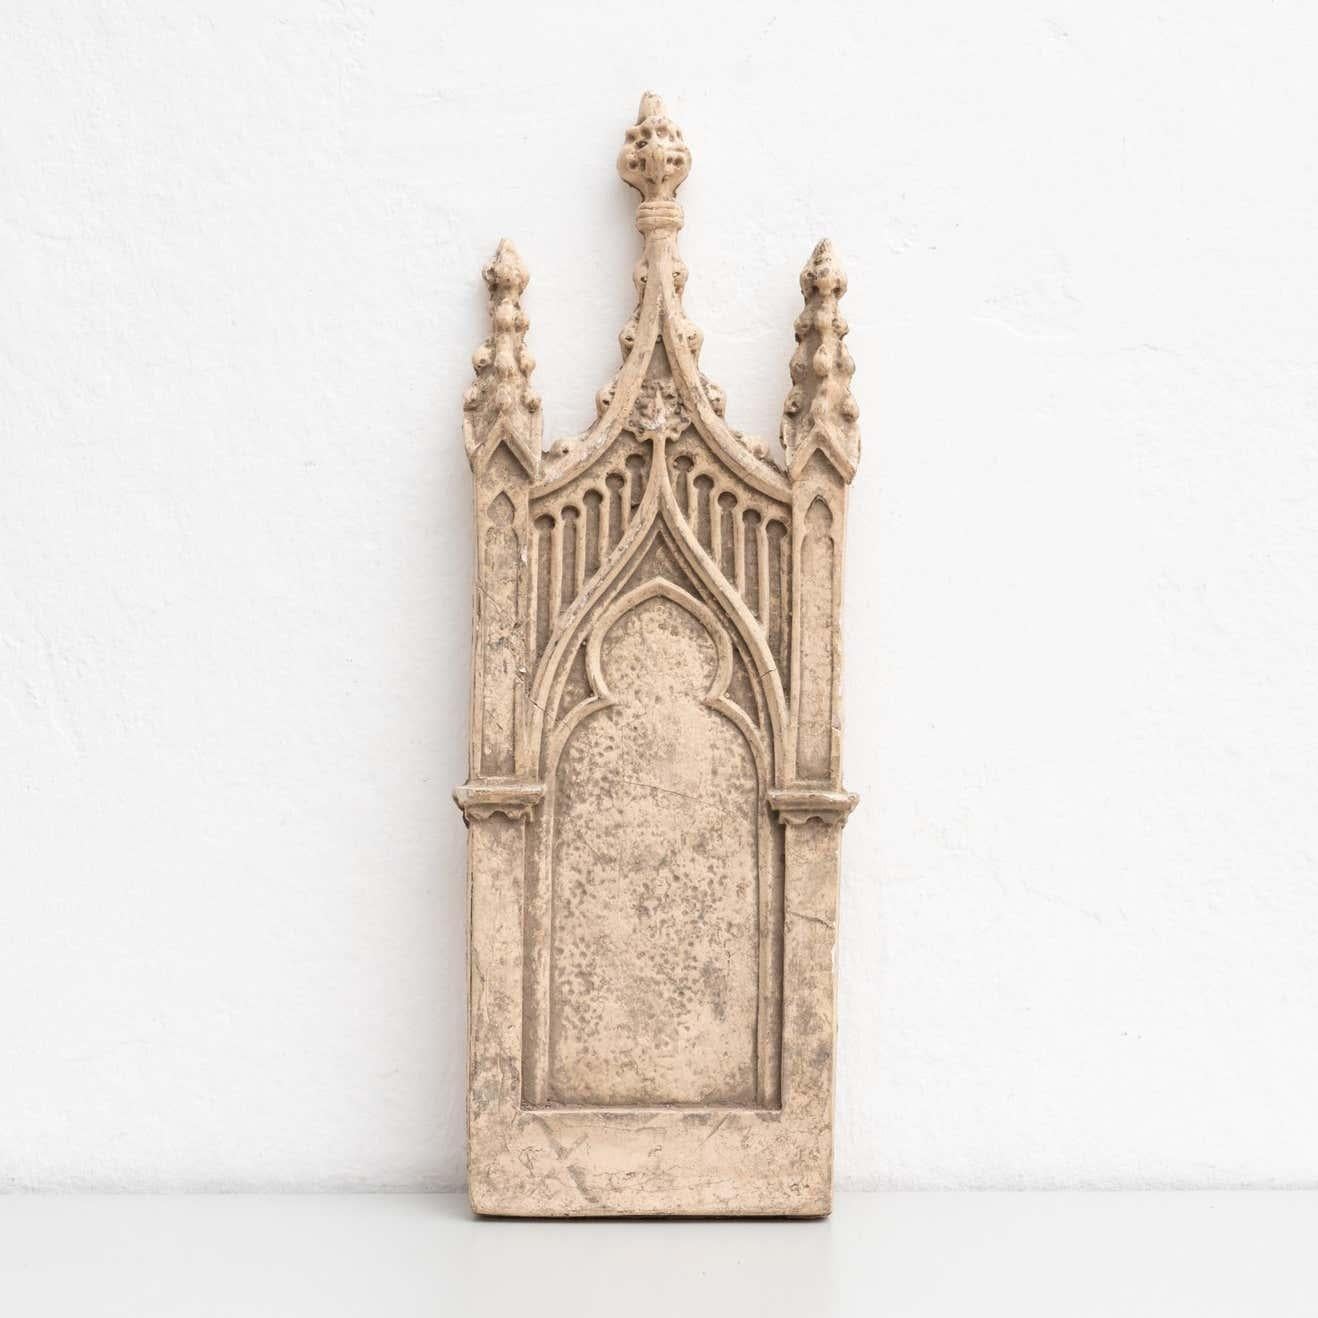 Traditional religious plaster wall artwork of a church.

Made in traditional Catalan atelier in Olot, Spain, circa 1950.

In original condition, with minor wear consistent with age and use, preserving a beautiful